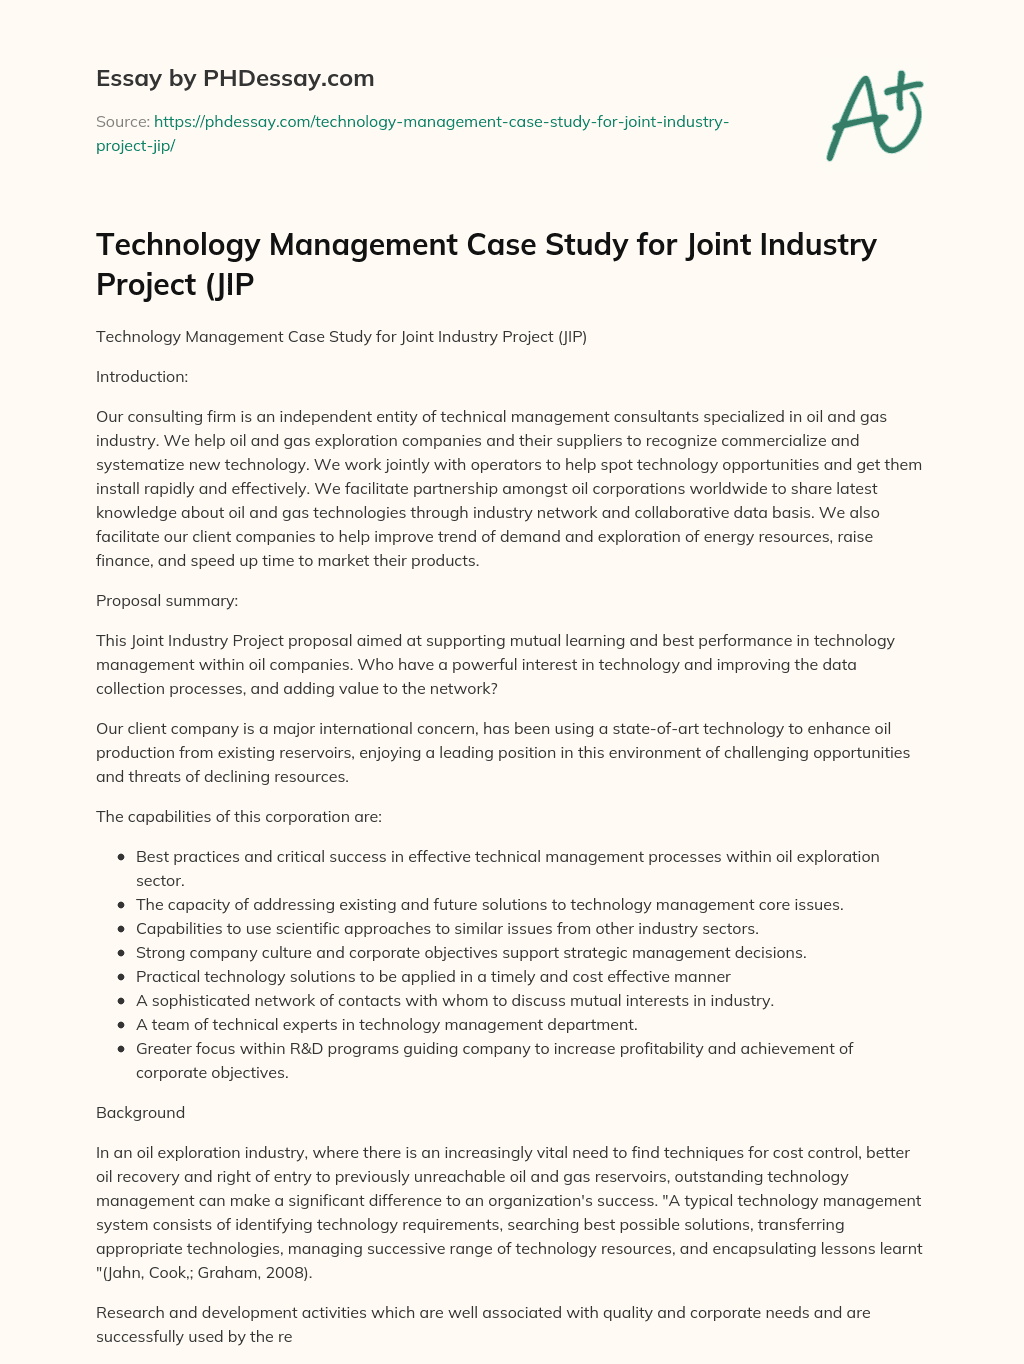 Technology Management Case Study for Joint Industry Project (JIP essay